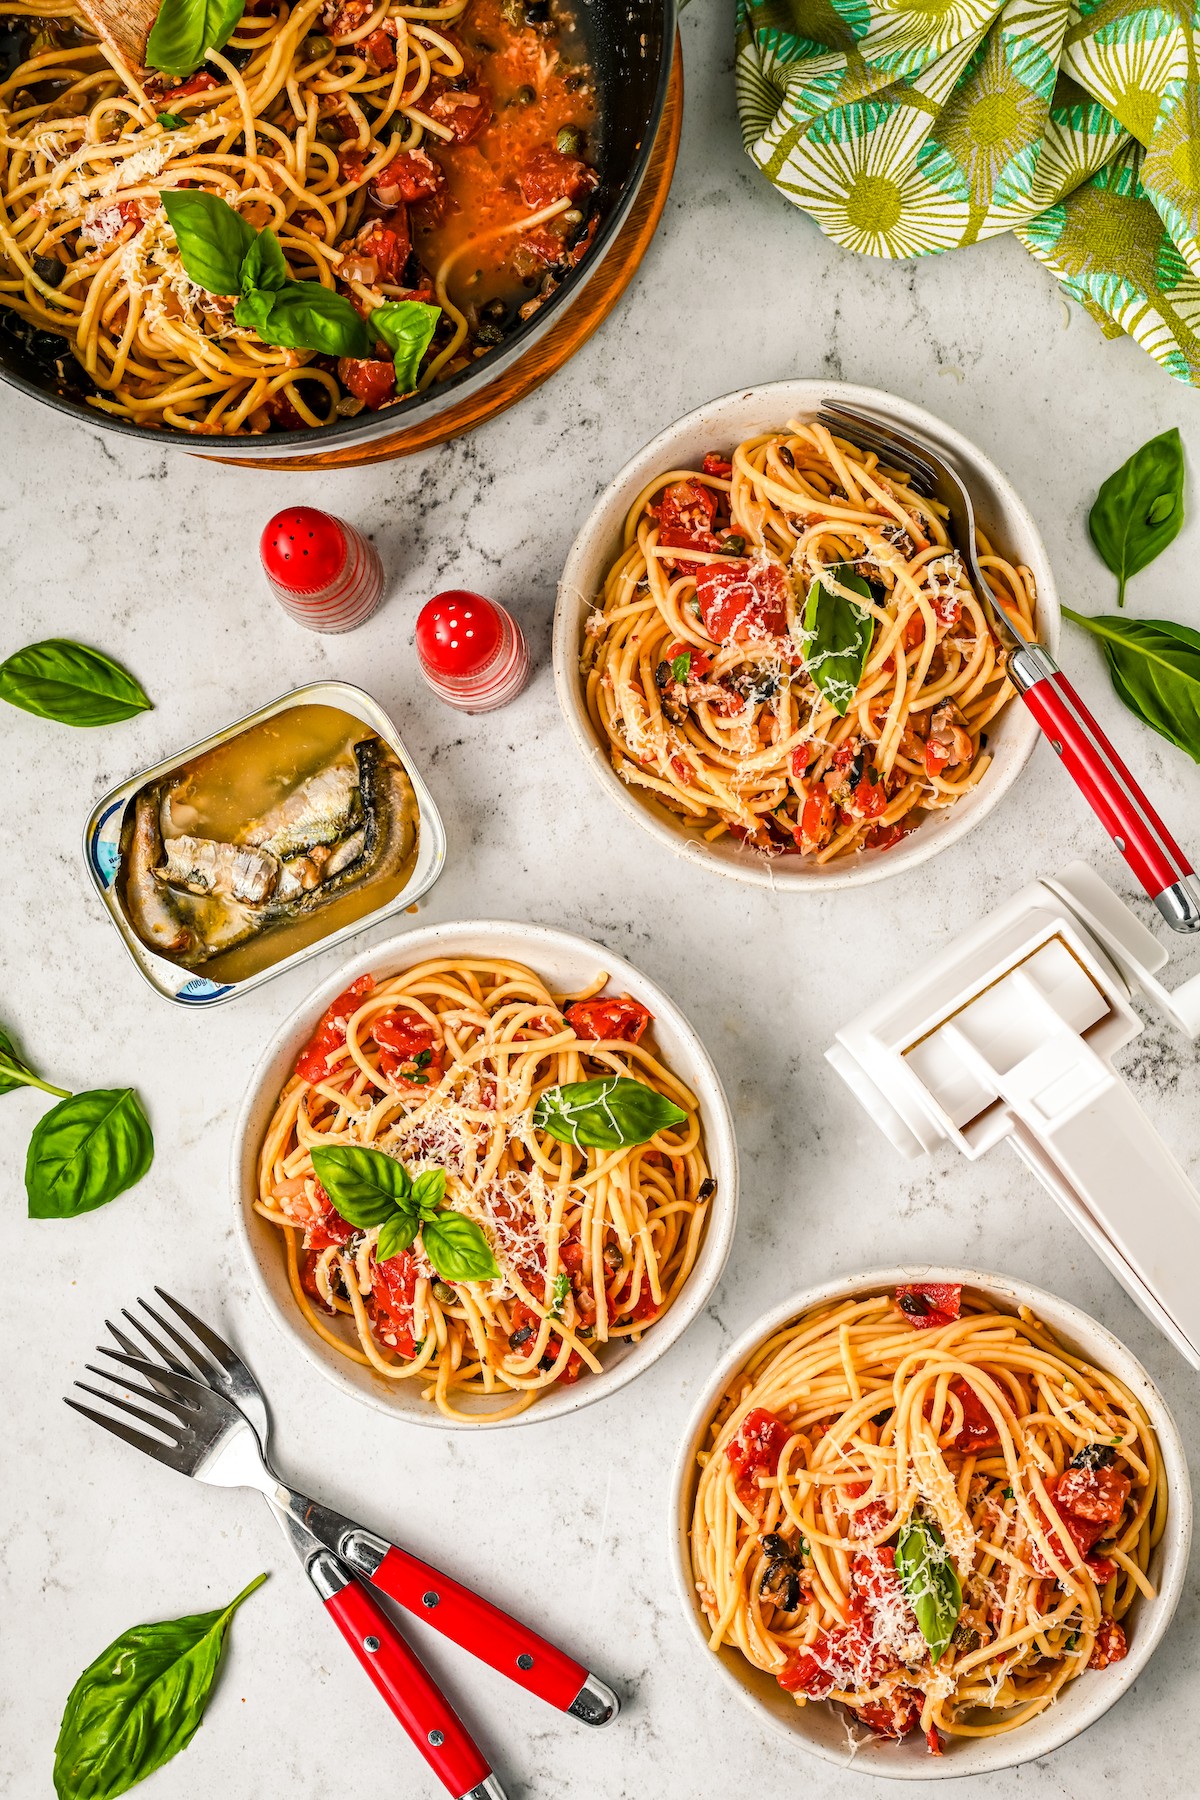 Bowls of pasta on a table with basil leaves, salt and pepper, and other ingredients.